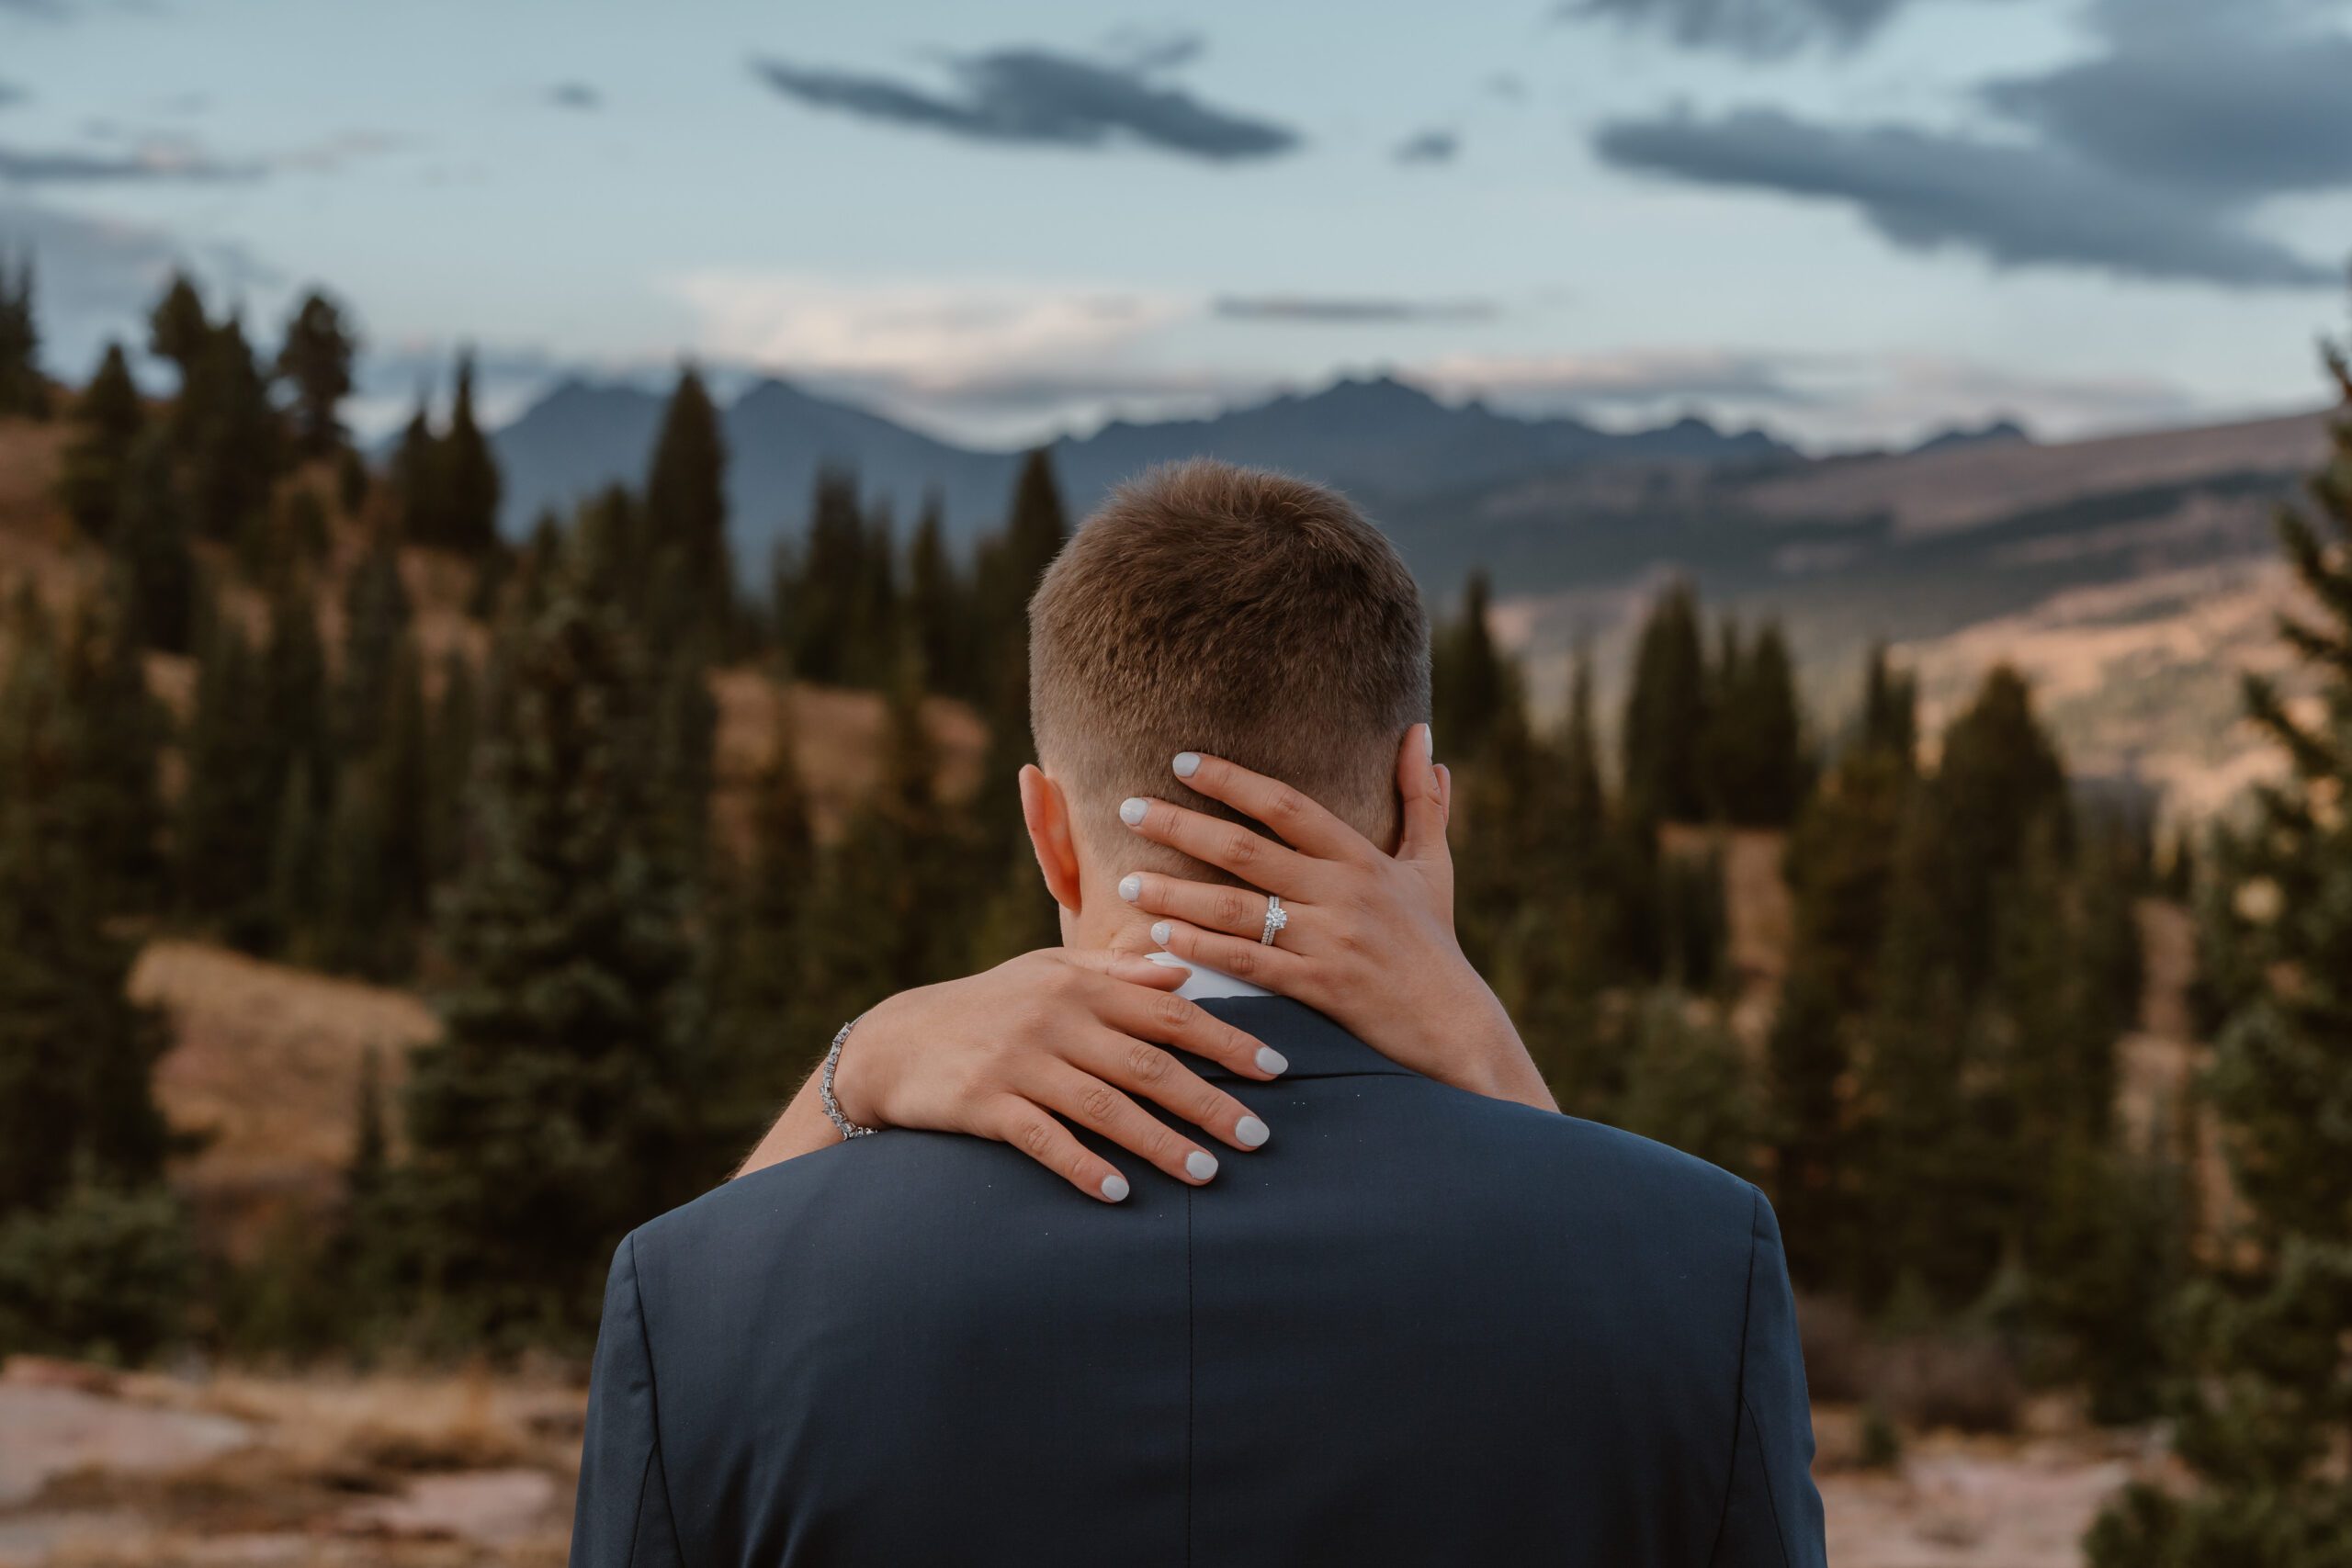 A groom is shown from the back with his bride's hands carefully wrapped around his head, her engagement ring and wedding band shown.